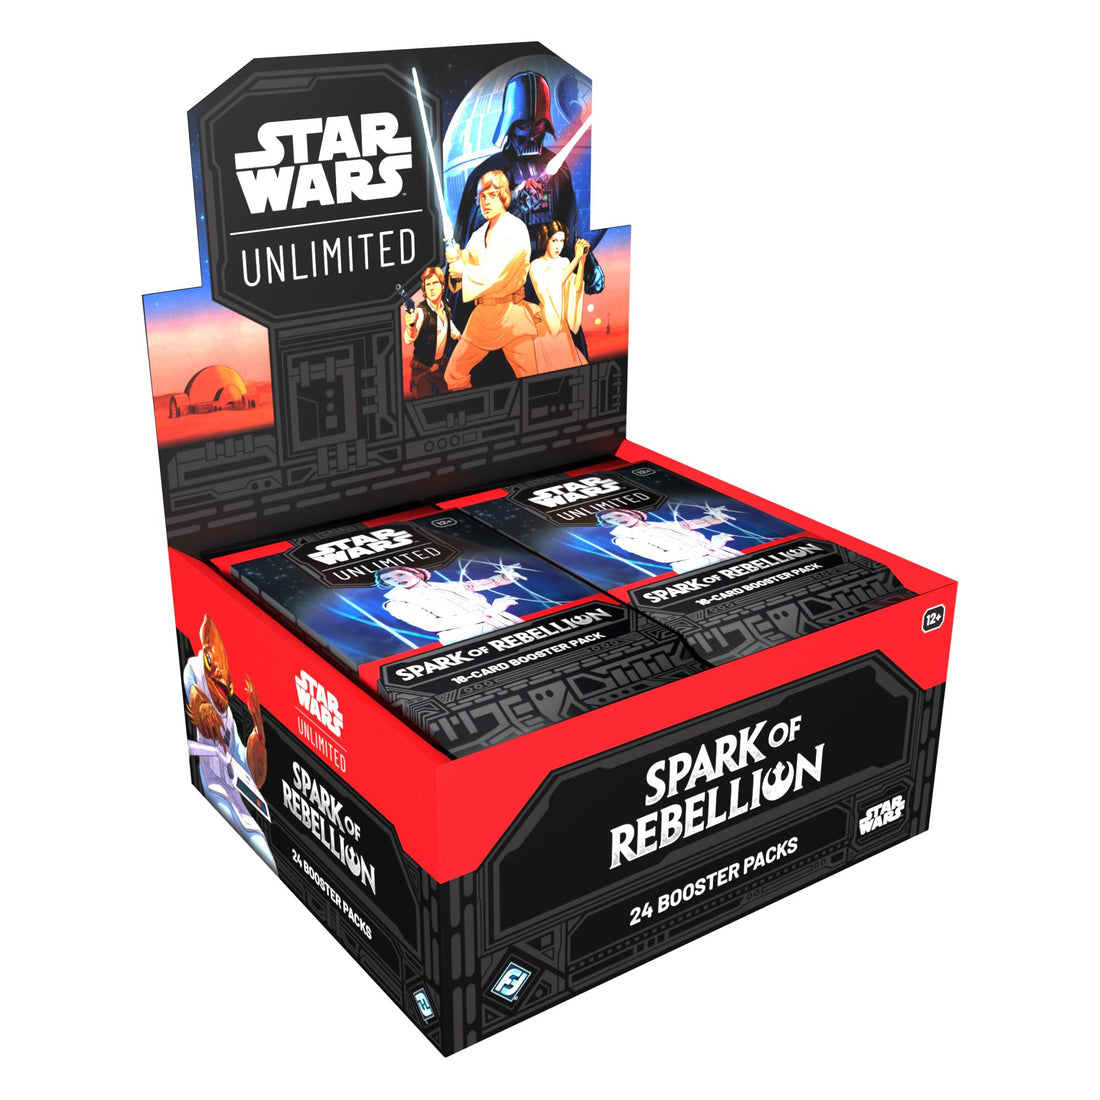 Star Wars: Unlimited TCG Spark of Rebellion BOOSTER DISPLAY (Set of 24 Booster Packs) - Trading Card Game for Kids &amp; Adults, Ages 12+, 2+ Players, 20 Min Playtime, Made by Fantasy Flight Games